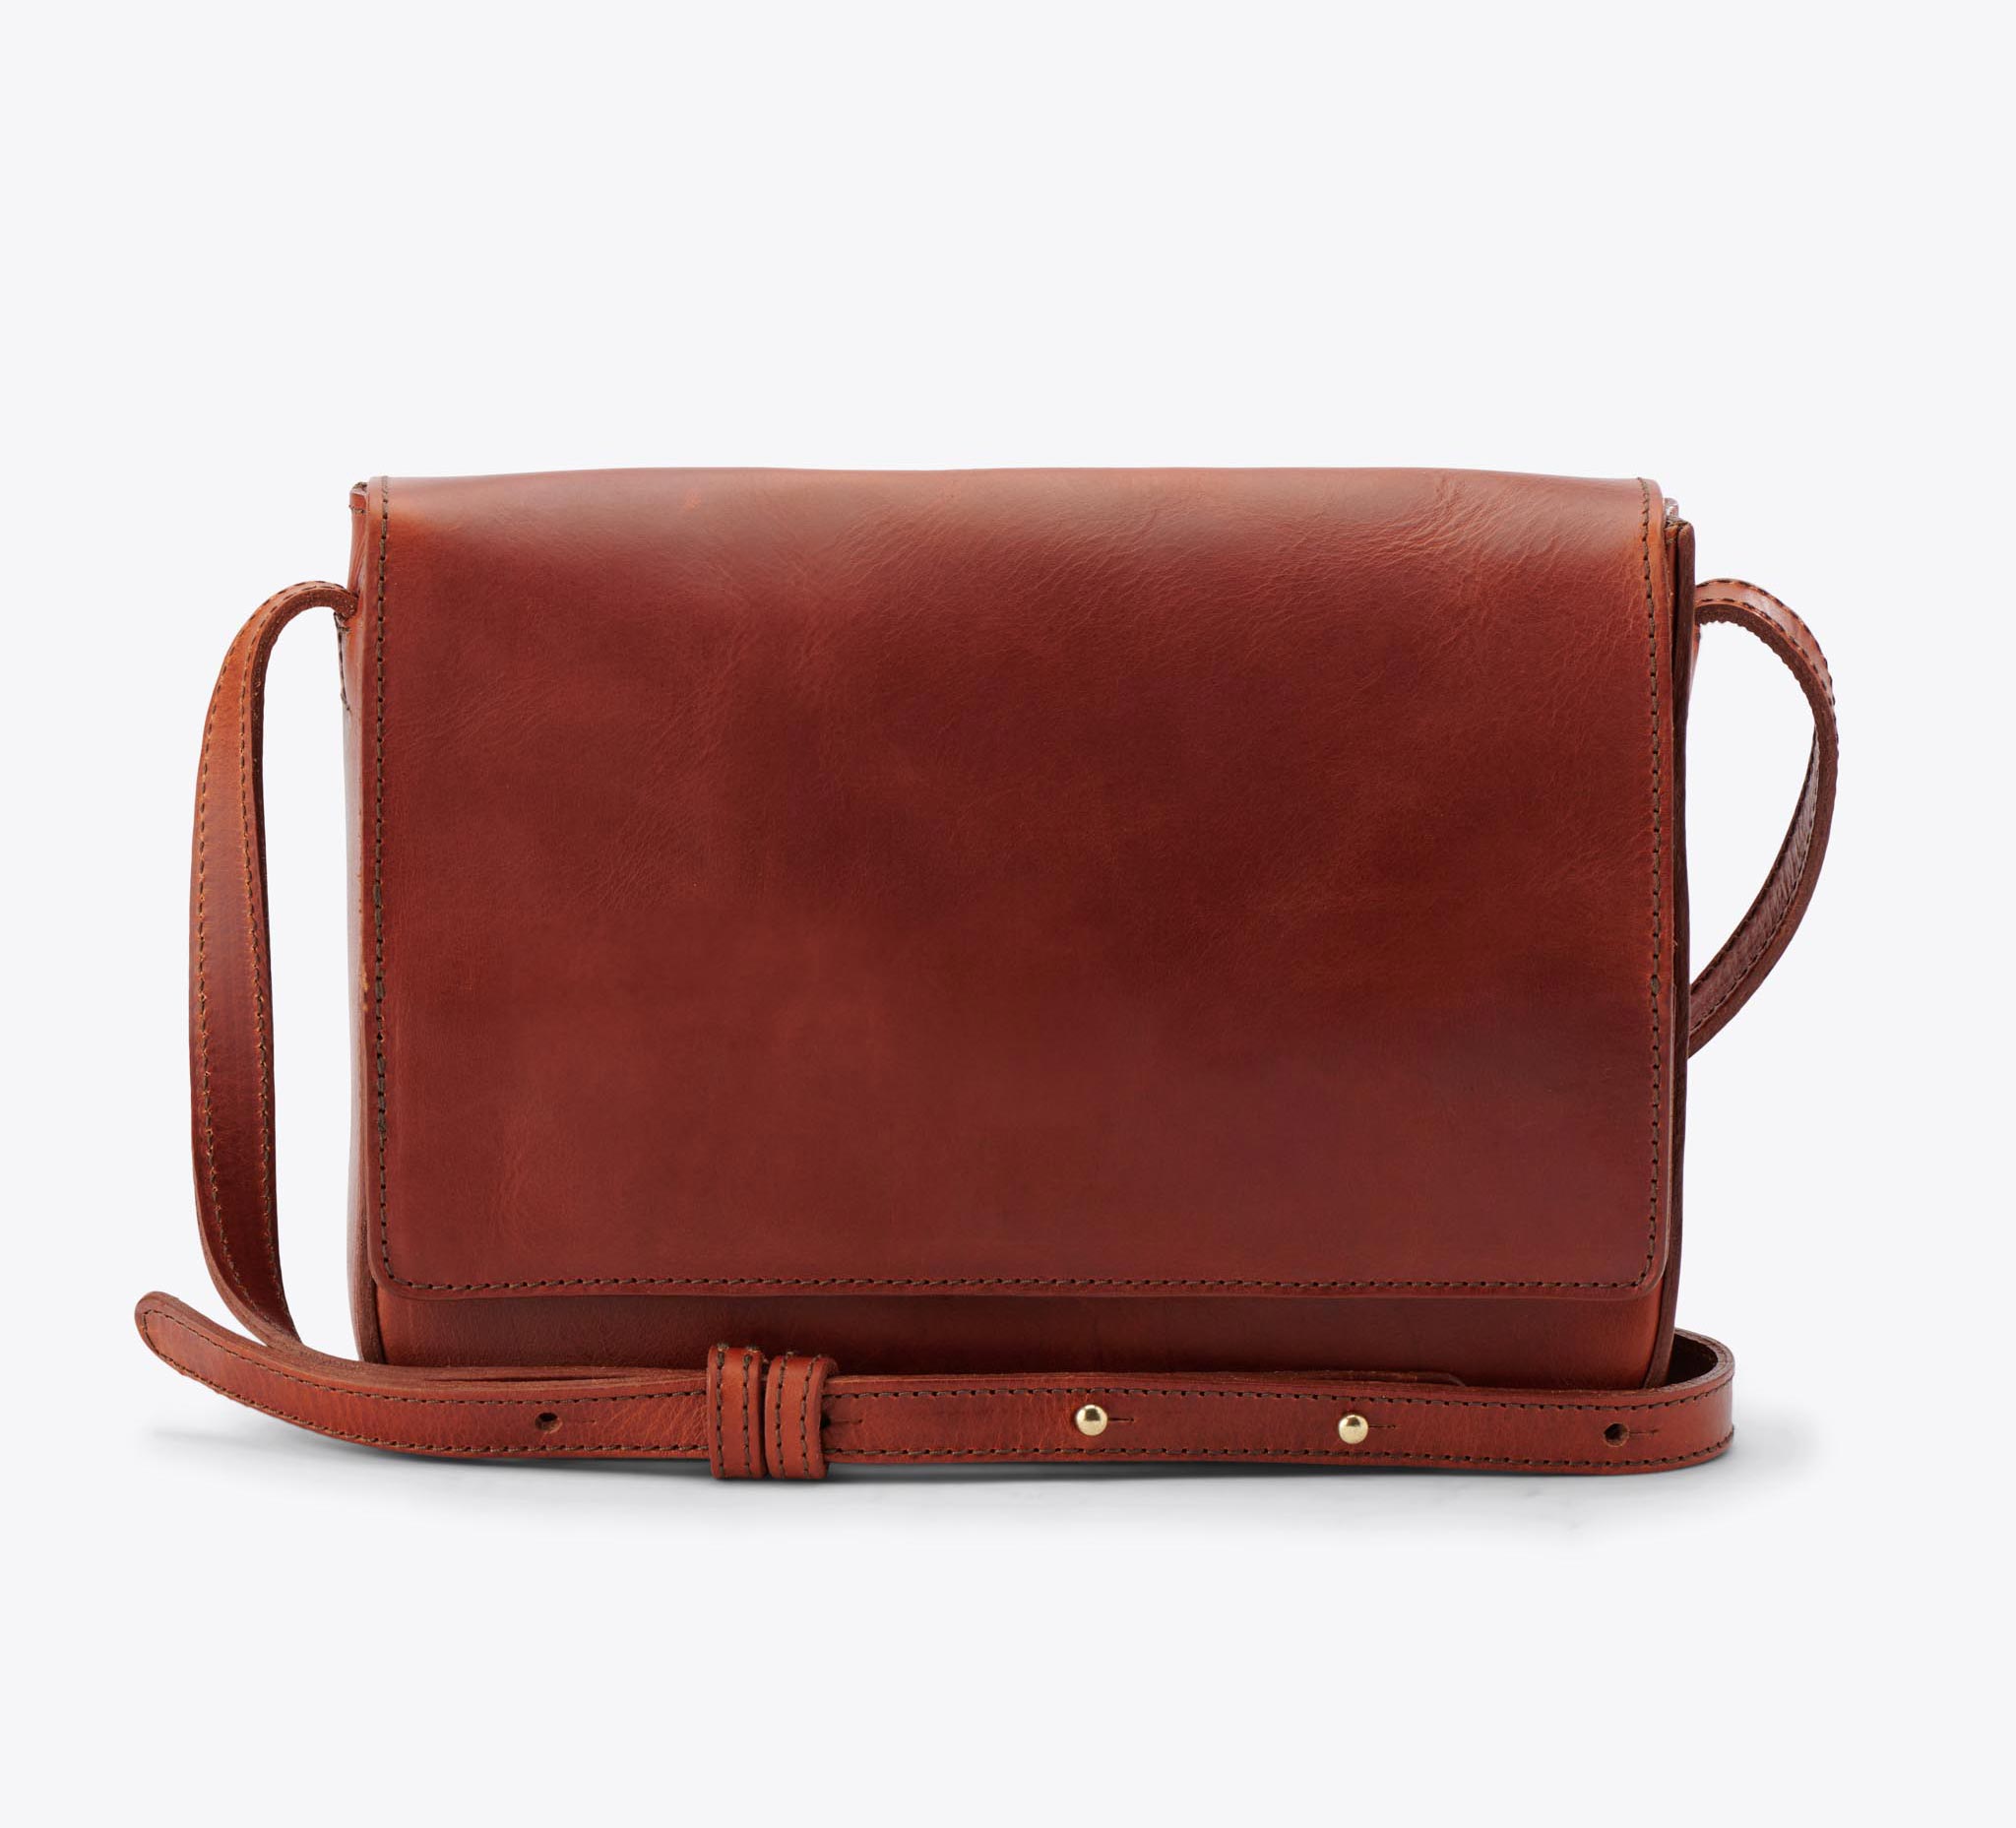 Nisolo Clara Crossbody Rosewood - Every Nisolo product is built on the foundation of comfort, function, and design. 